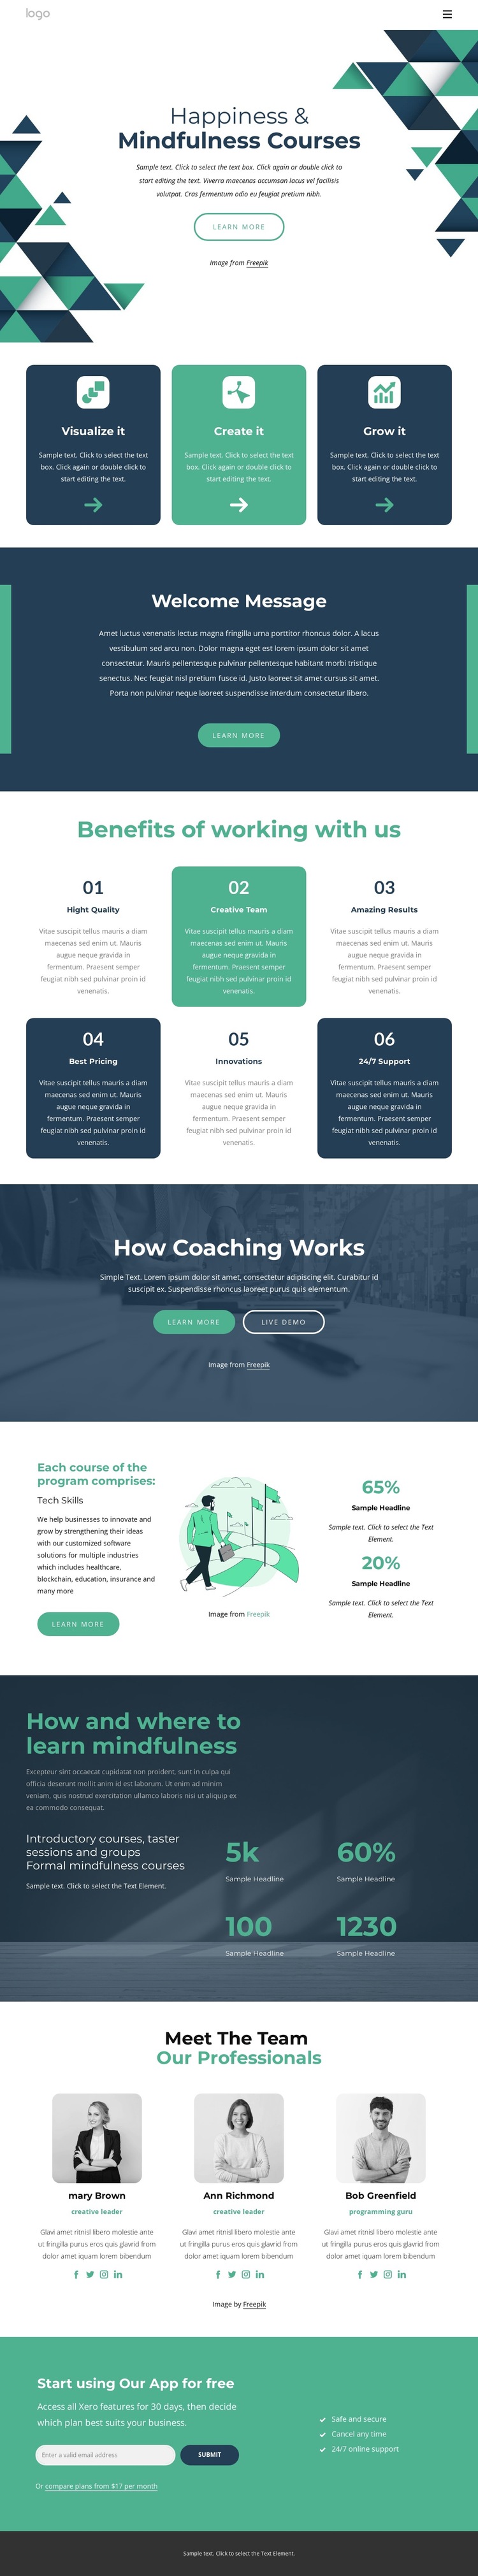 Top mindfulness courses HTML5 Template